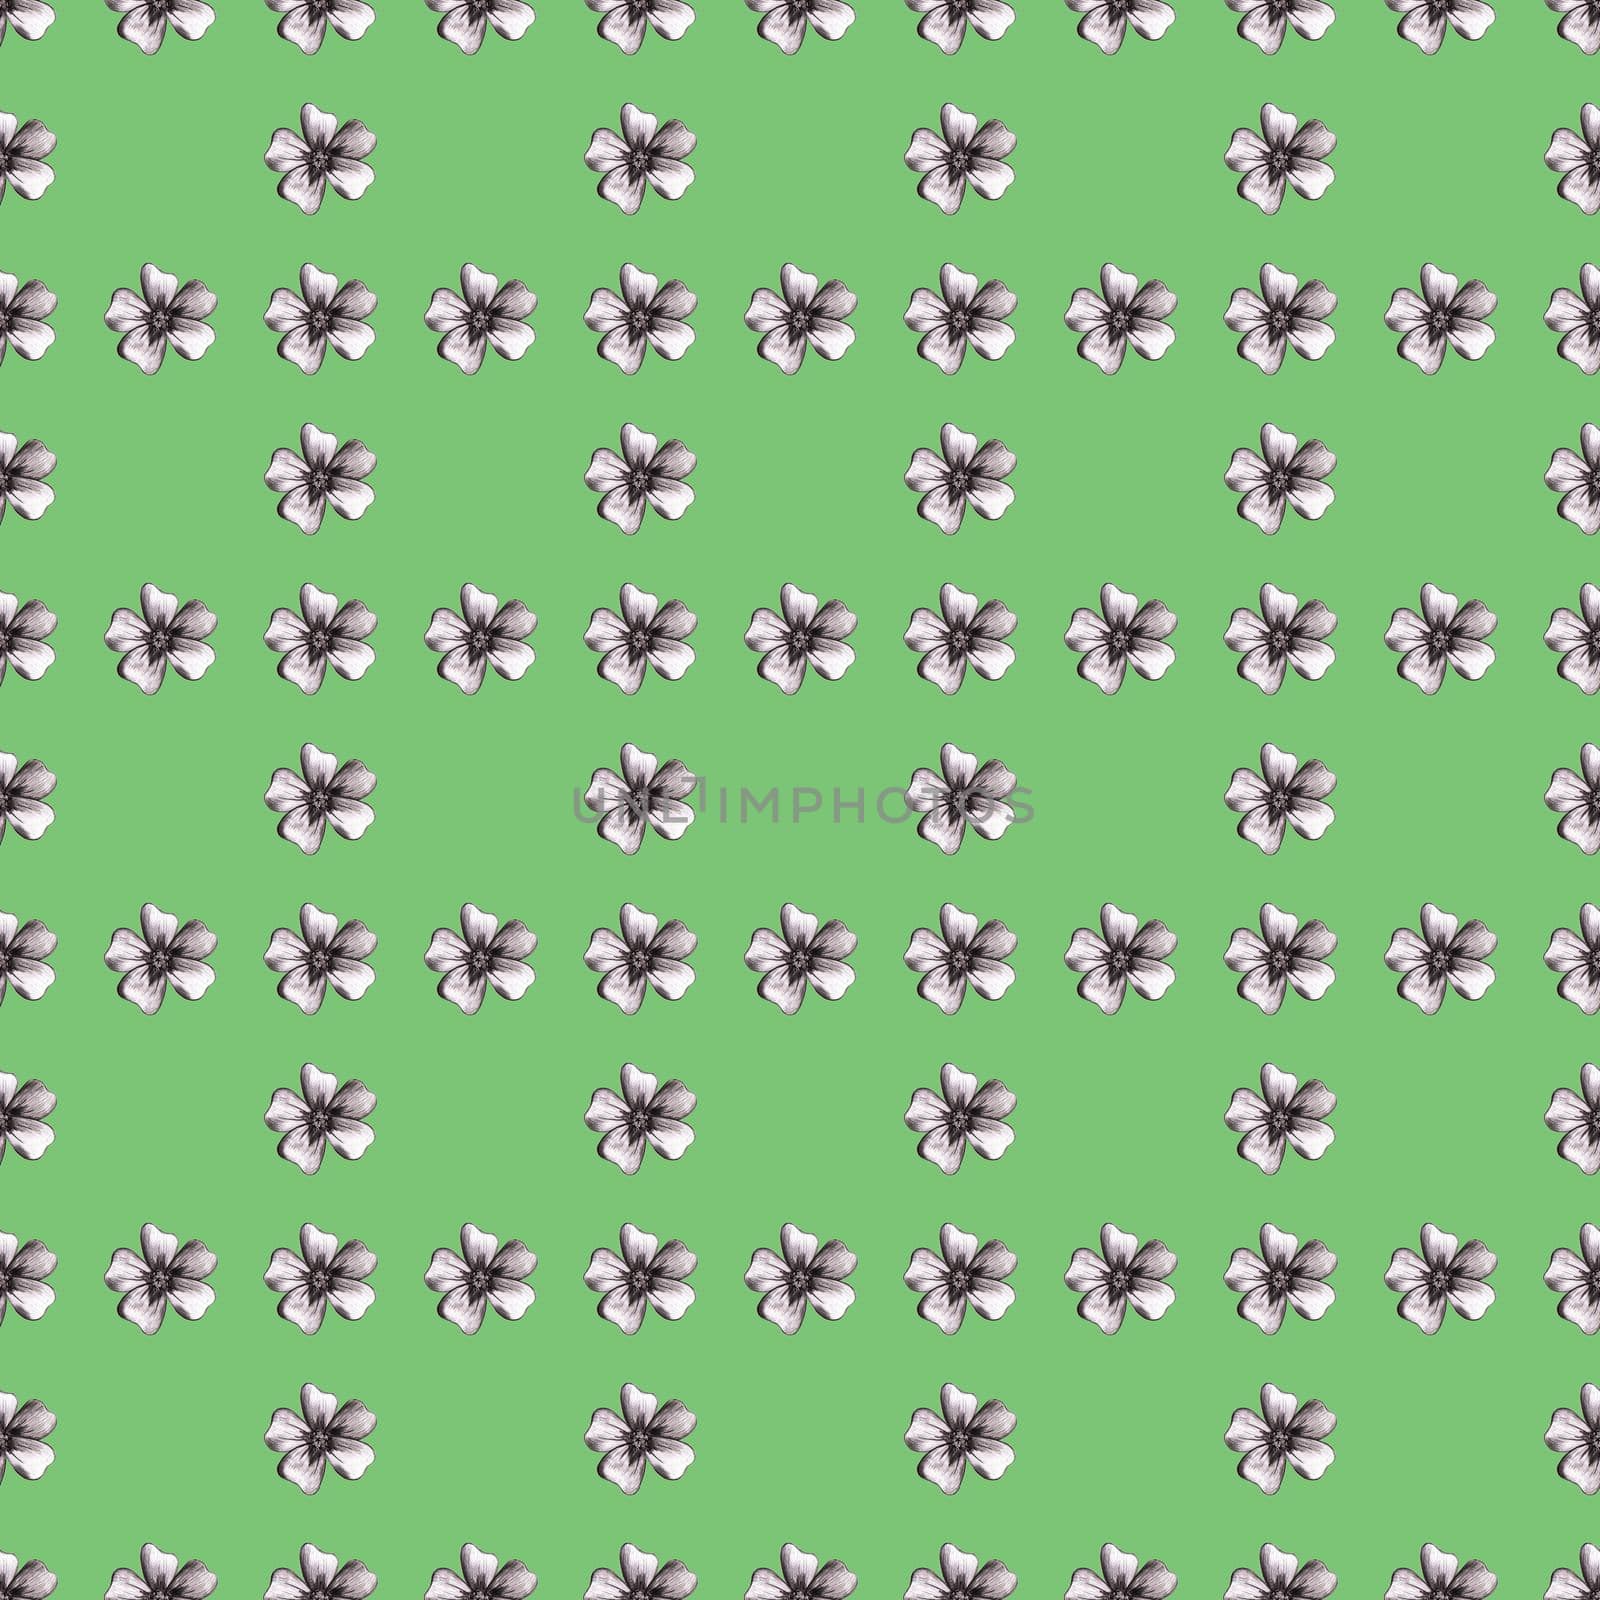 Seamless Pattern with Hand-Drawn Flower. Light Green Background with Thin-leaved Marigolds for Print, Design, Holiday, Wedding and Birthday Card.